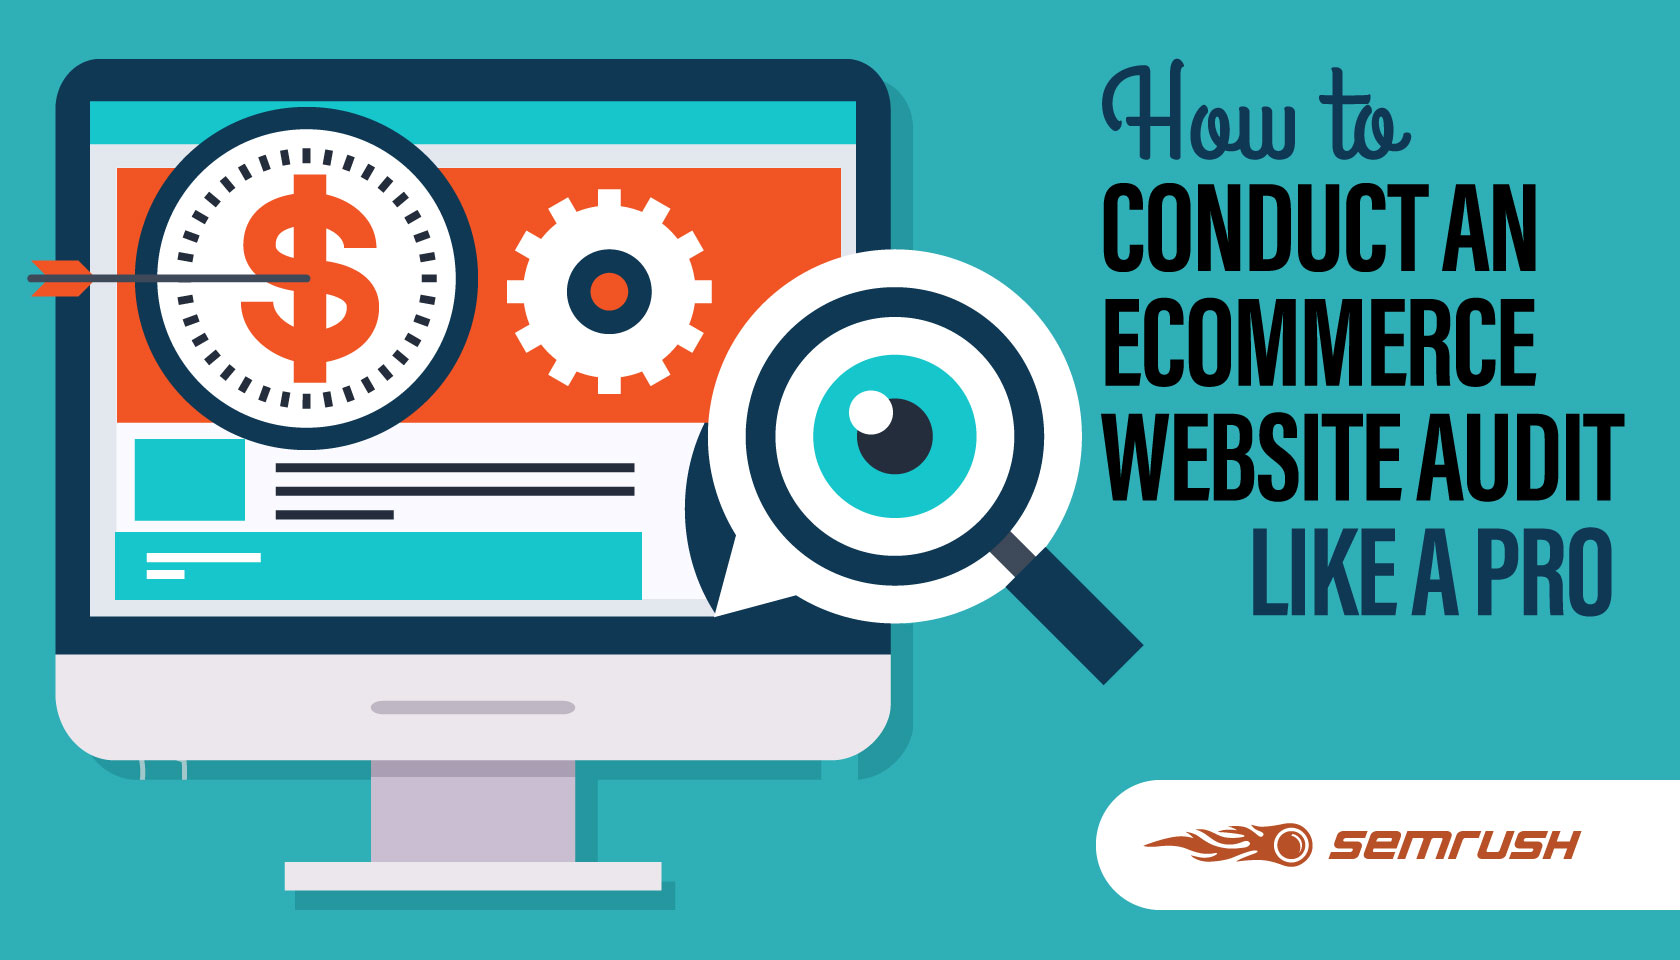 How to Conduct an Ecommerce Website Audit Like a Pro?